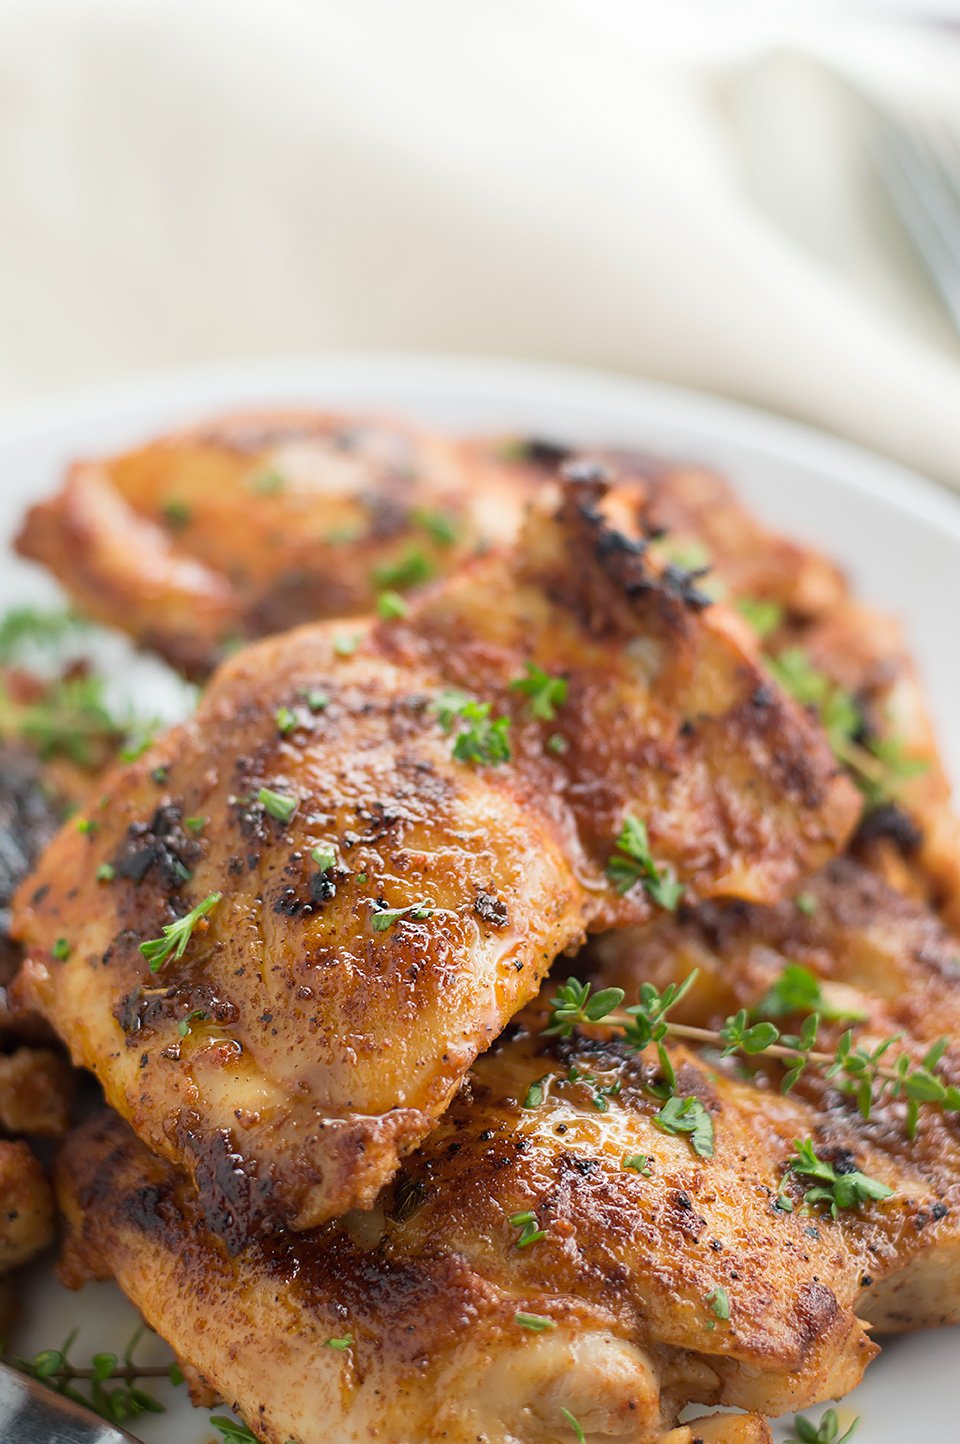 Smoky and Spicy Paprika Grilled Chicken - Life's Ambrosia